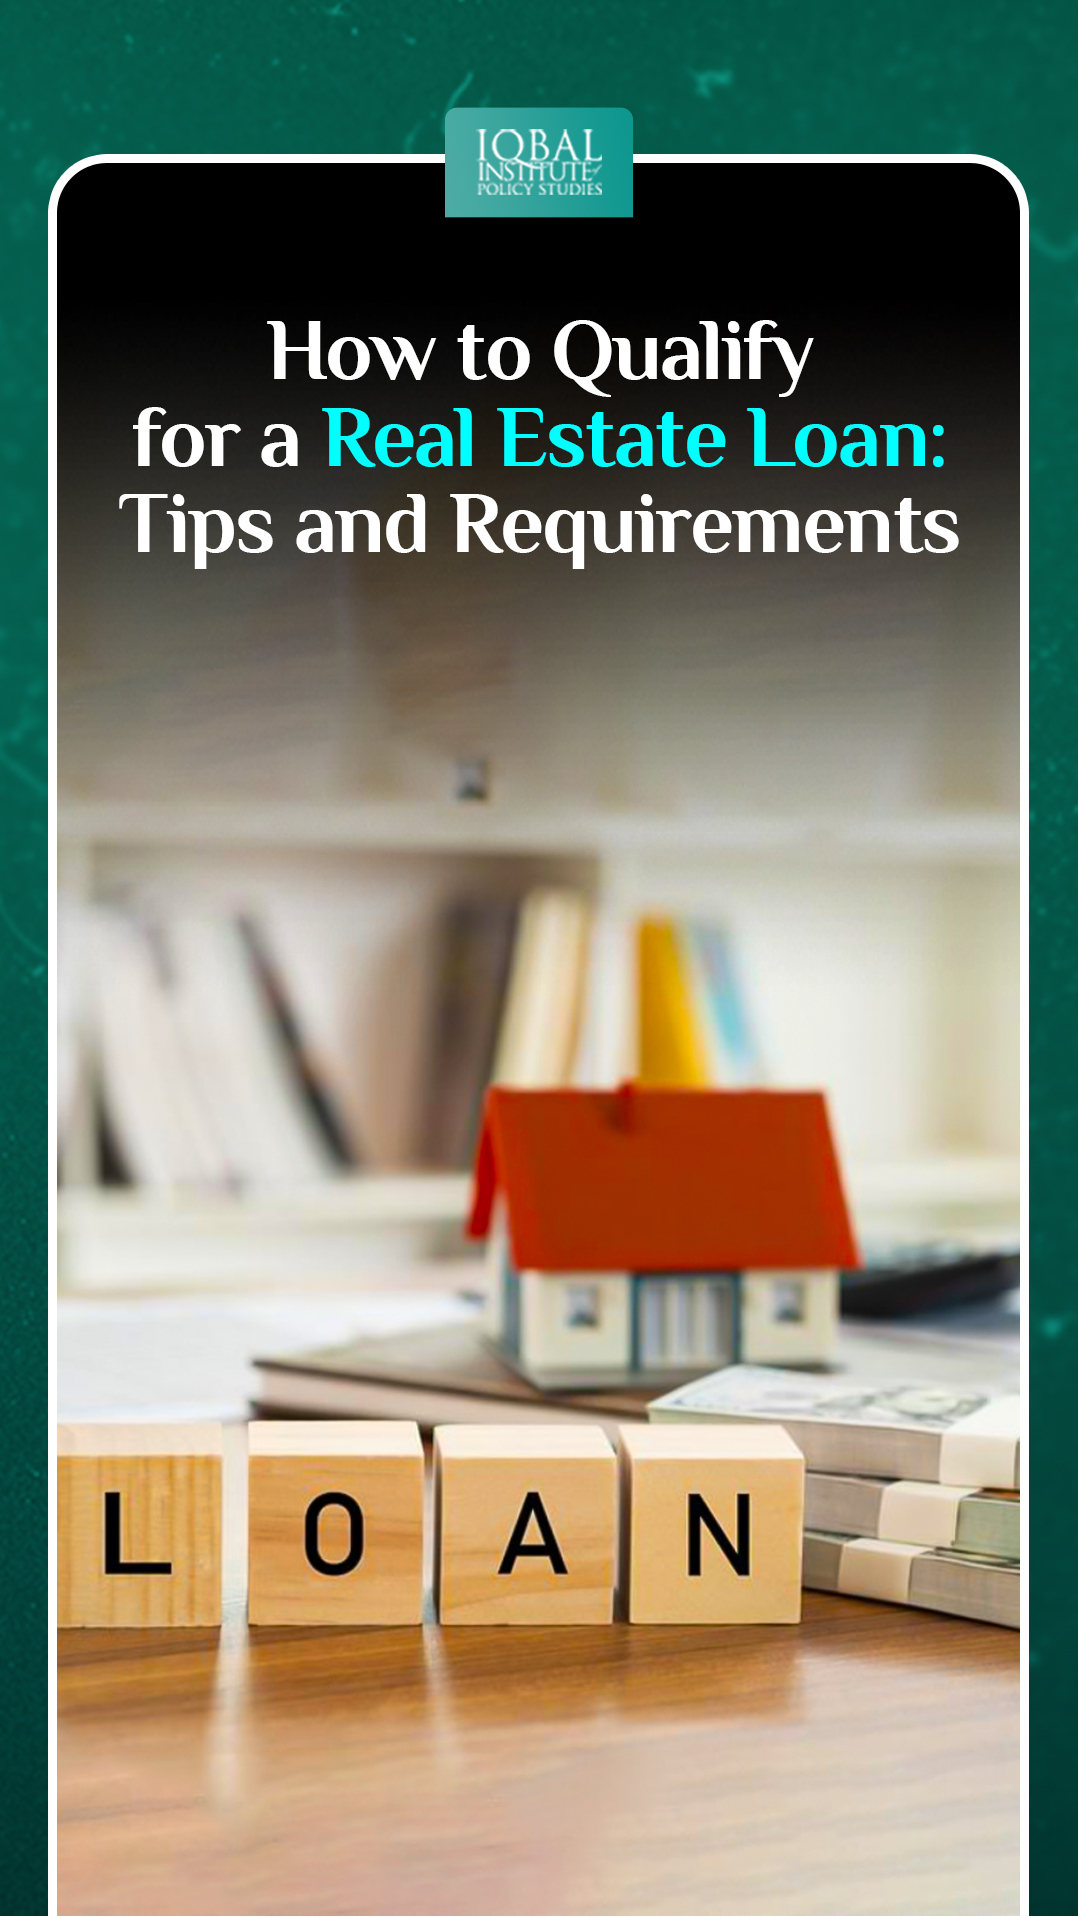 How to Qualify for a Real Estate Loan: Tips and Requirements